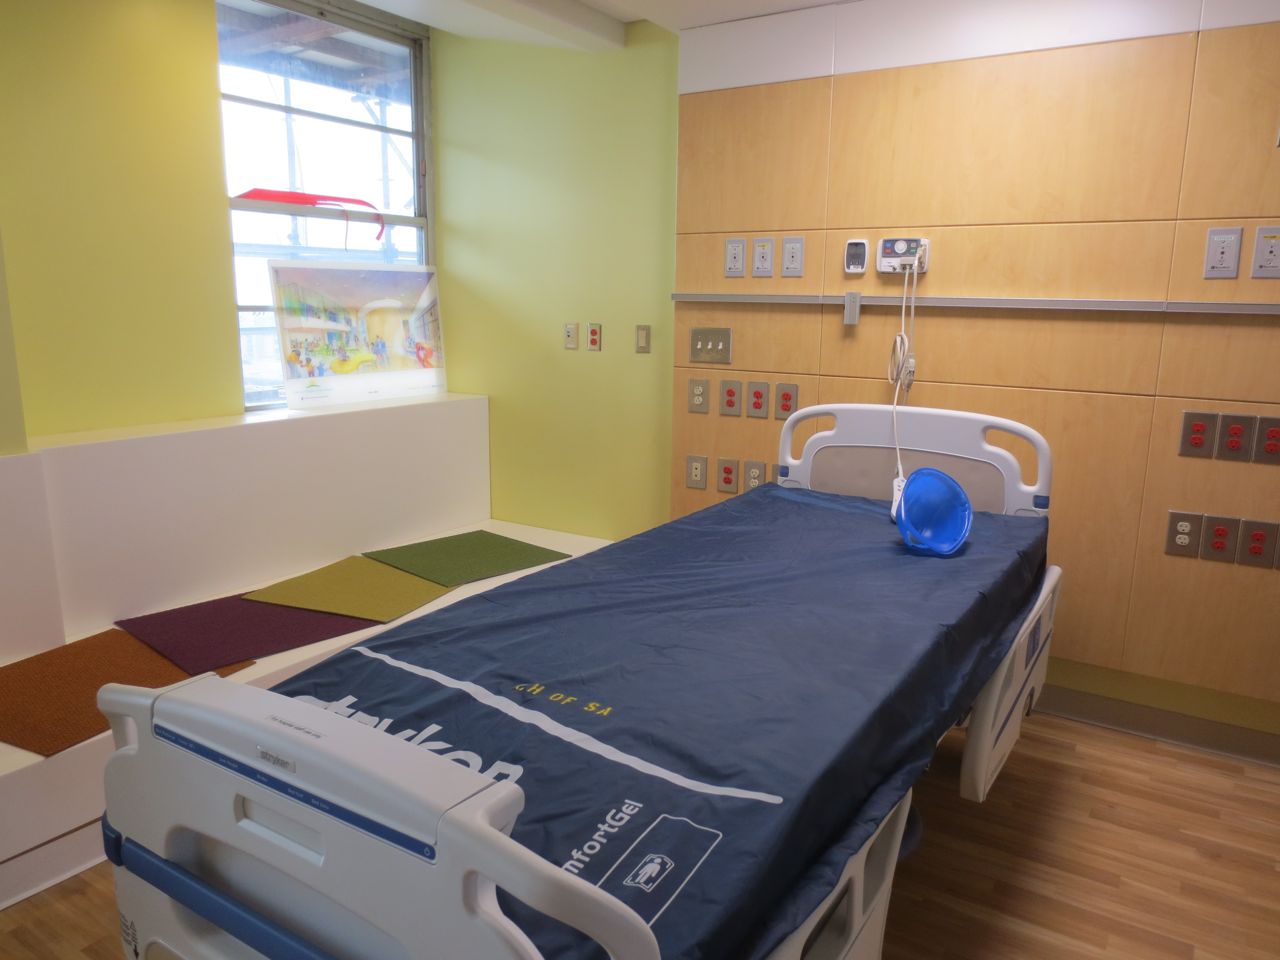 An example of a room at the new Children's Hospital of San Antonio | San Antonio Charter Moms